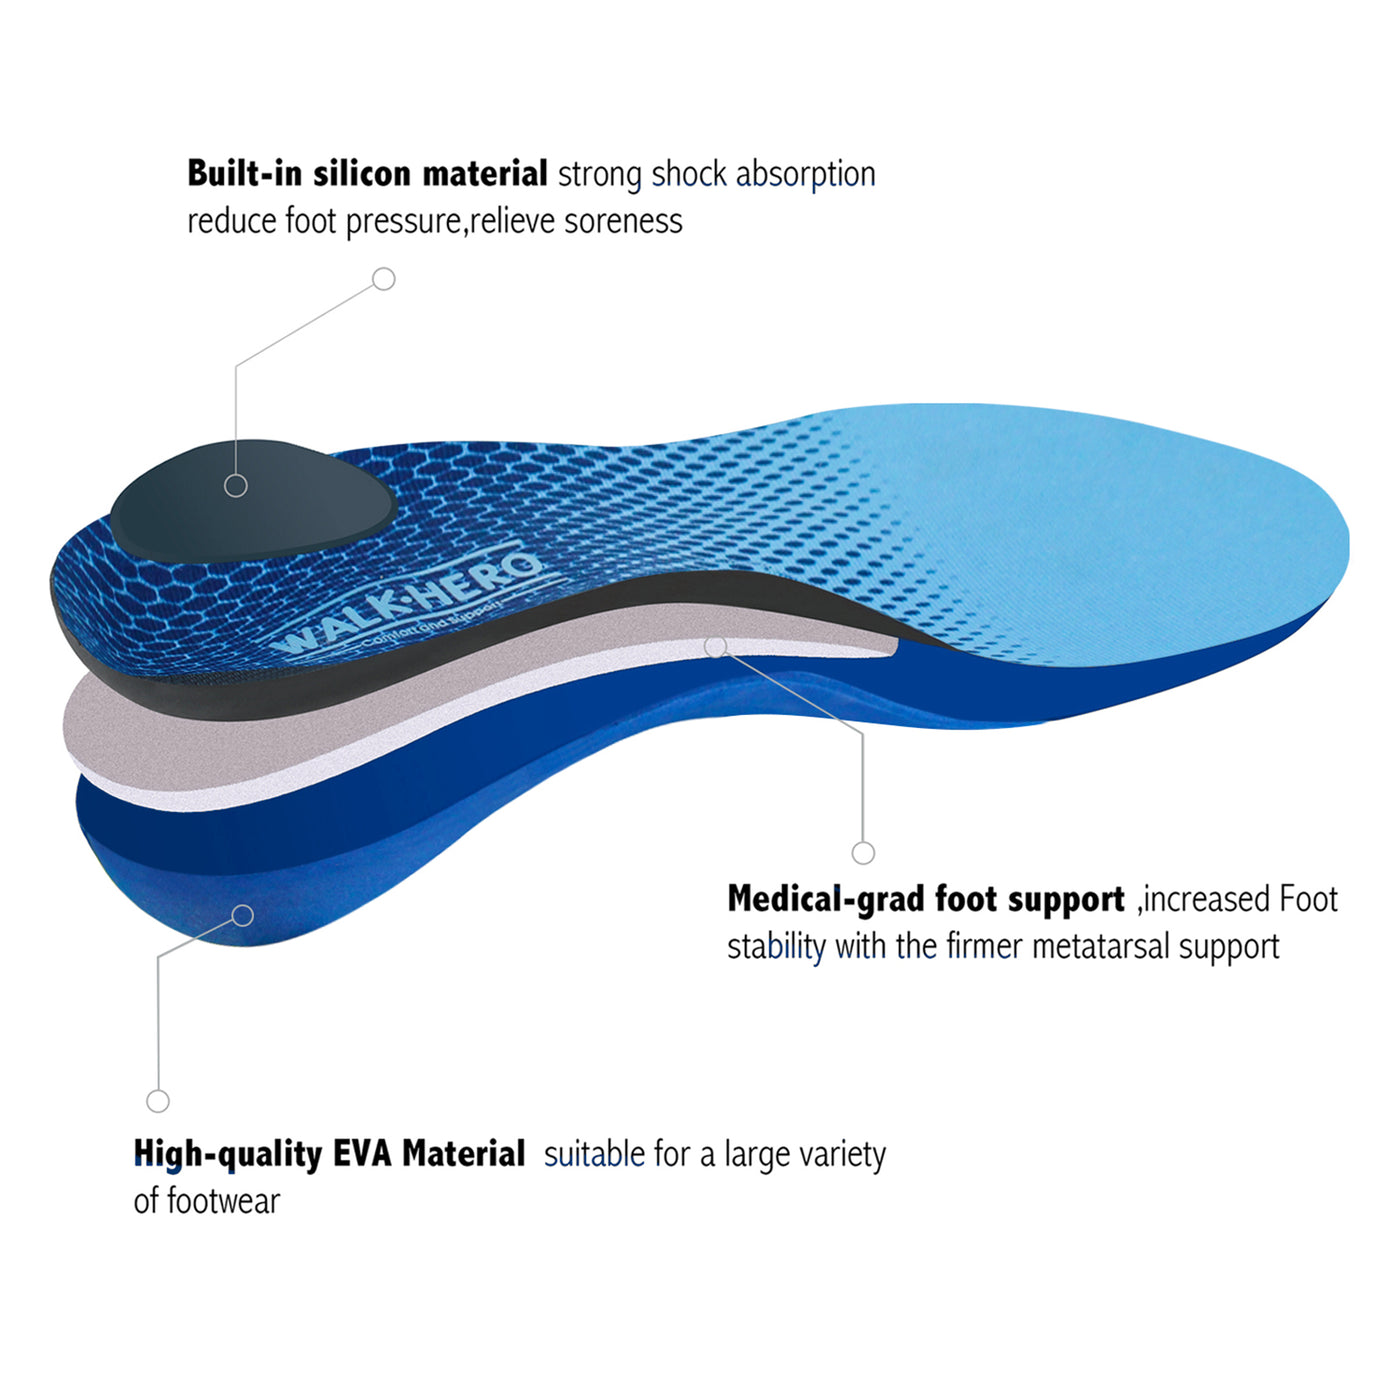 WALKHERO Men's Arch Support Orthotic Insoles New Blue & Gray 2-Pairs